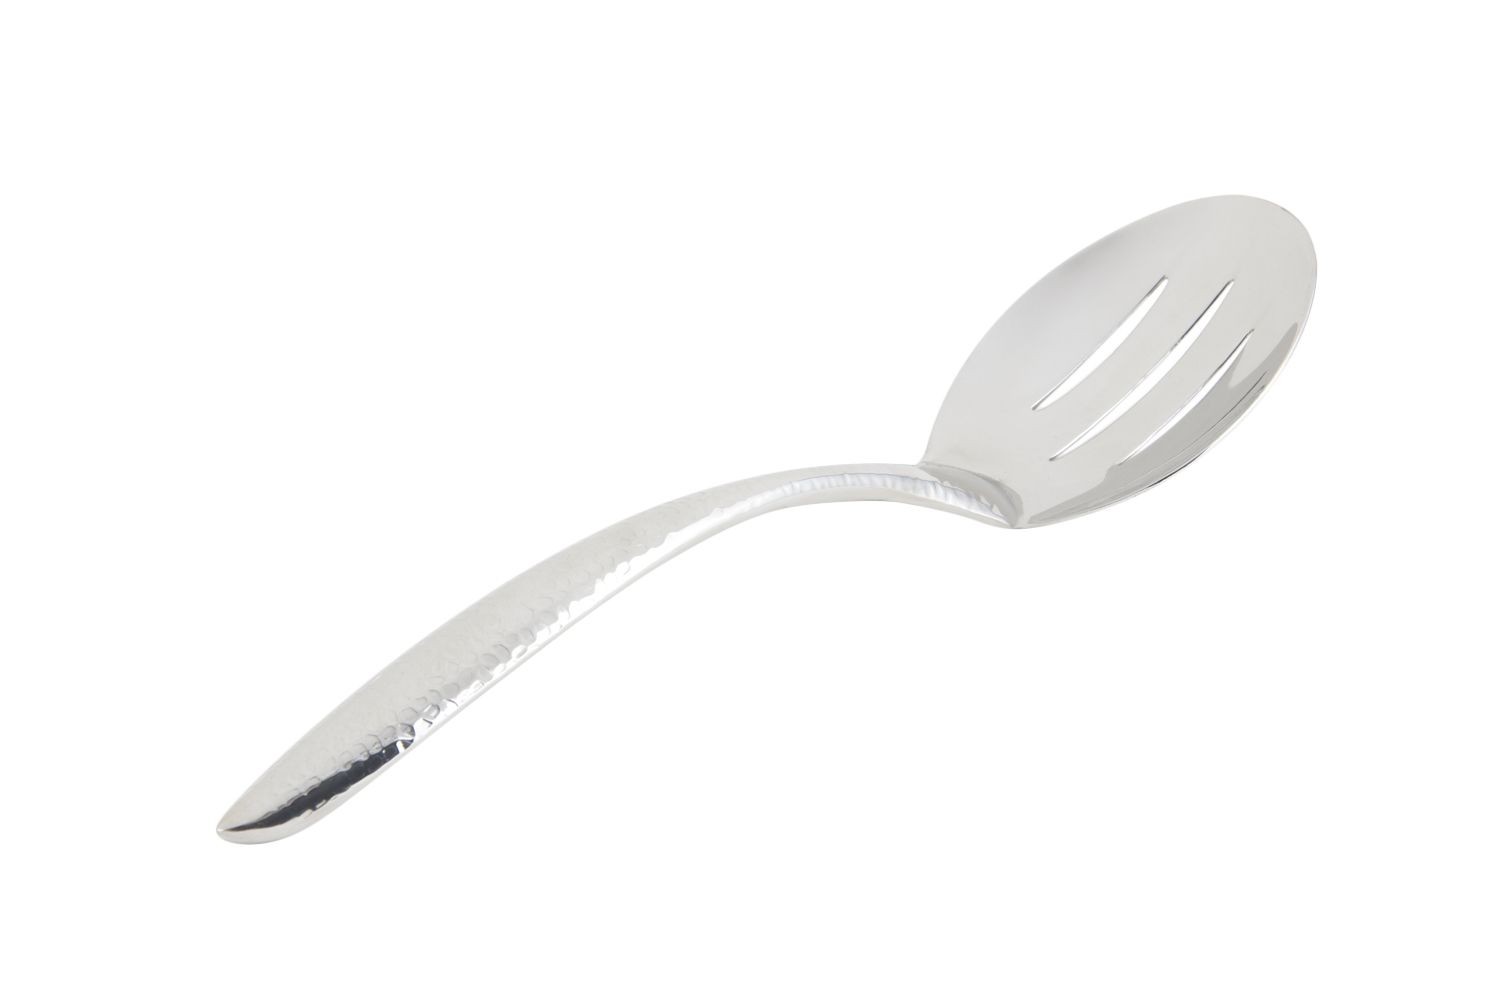 Bon Chef 9464HF EZ Use Banquet Serving Slotted Spoon with Hammered Finish, 9 3/4"